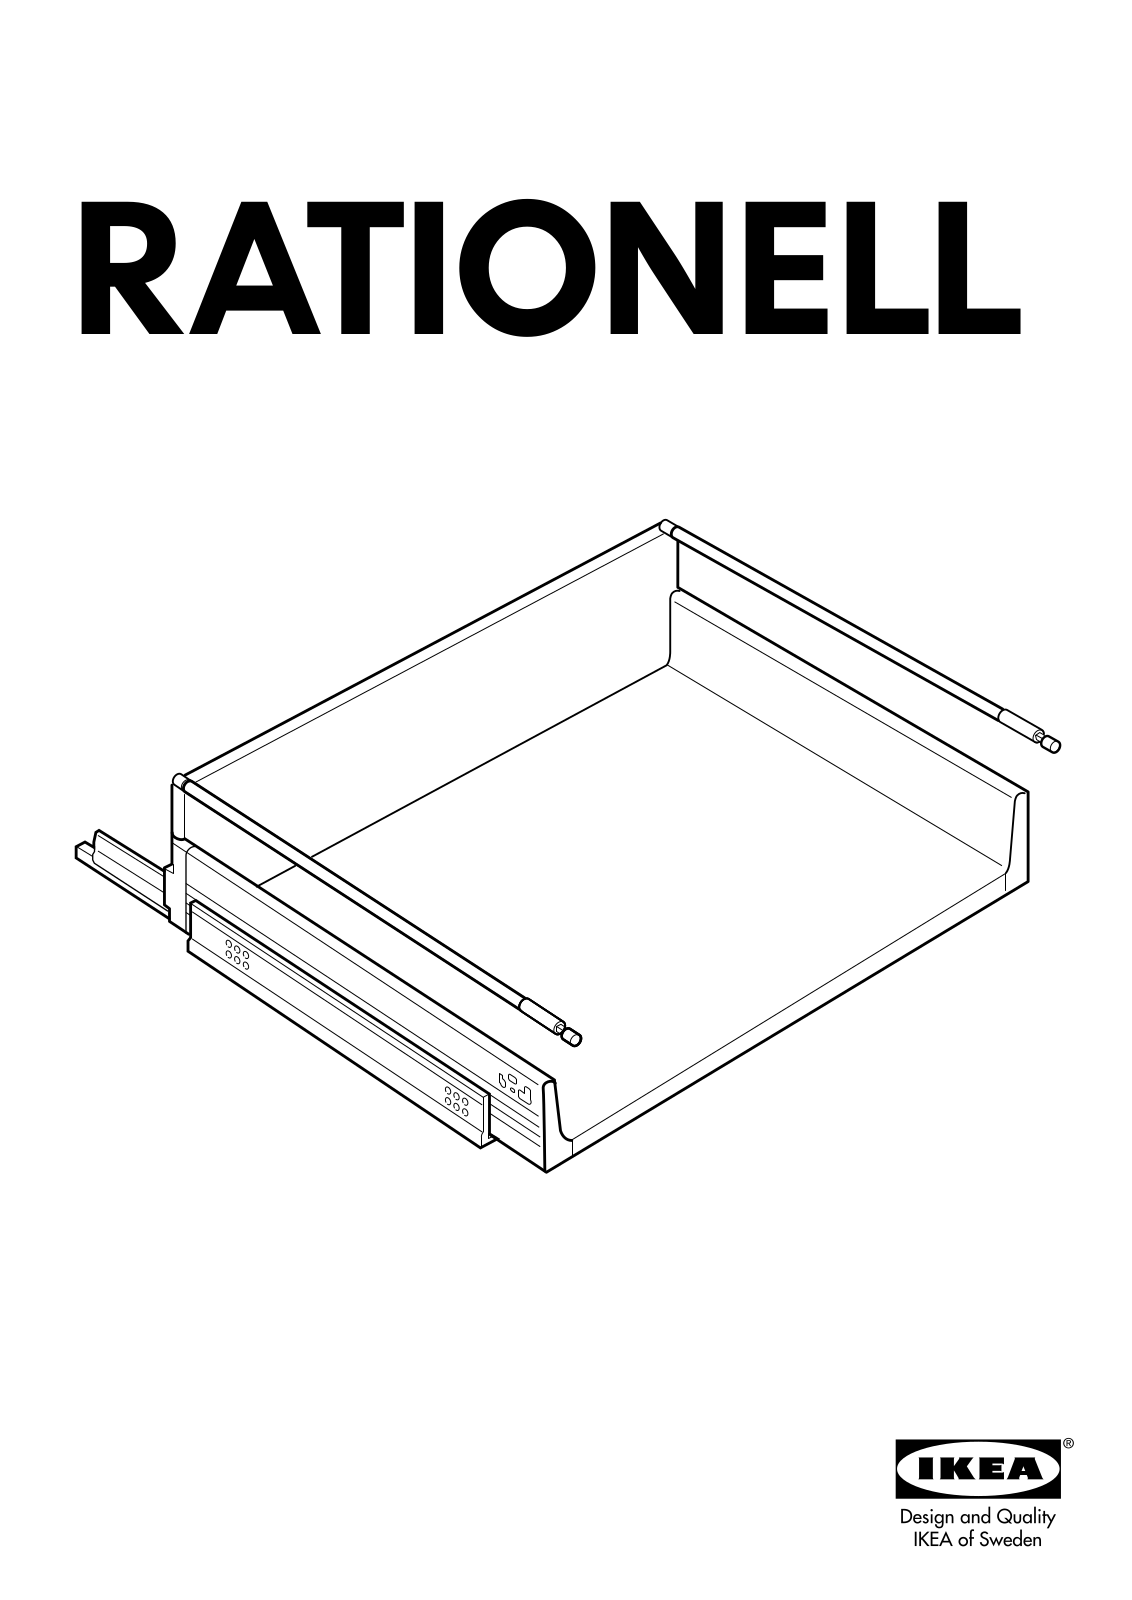 IKEA RATIONELL DEEP FULL EXTENDING DRAWER 15 Assembly Instruction